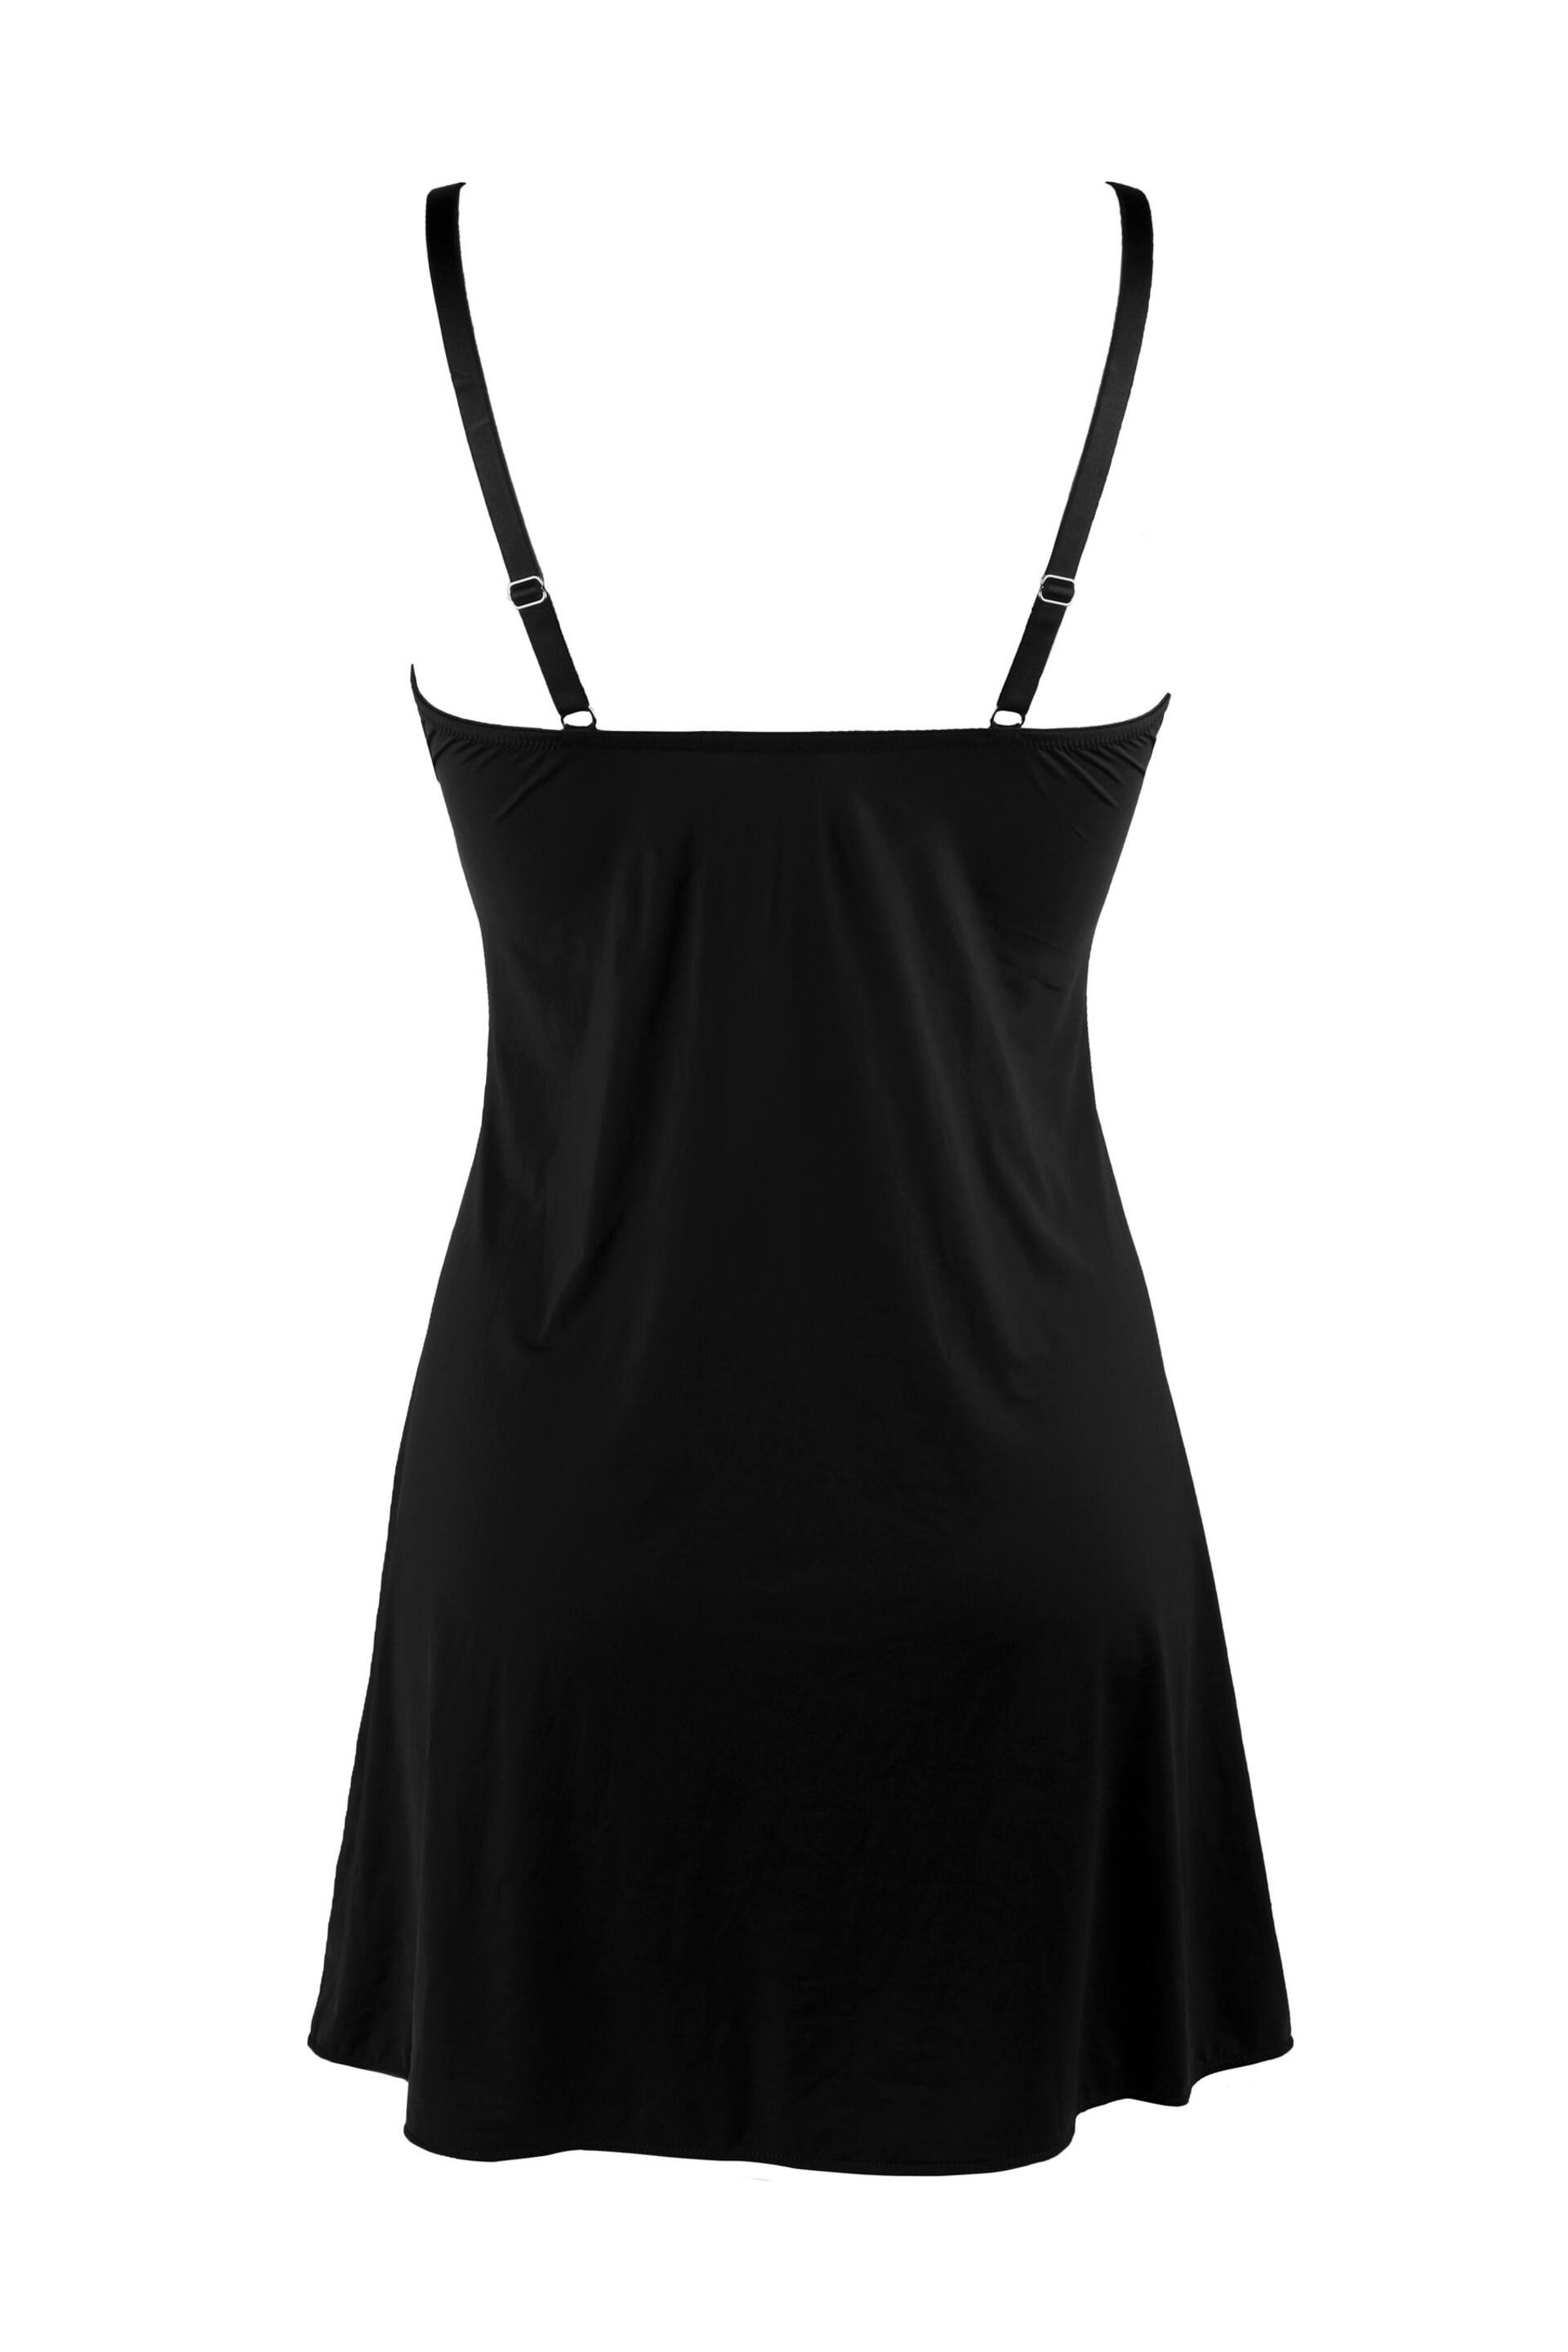 Pour Moi Black Viva Luxe Chemise - Image 3 of 3